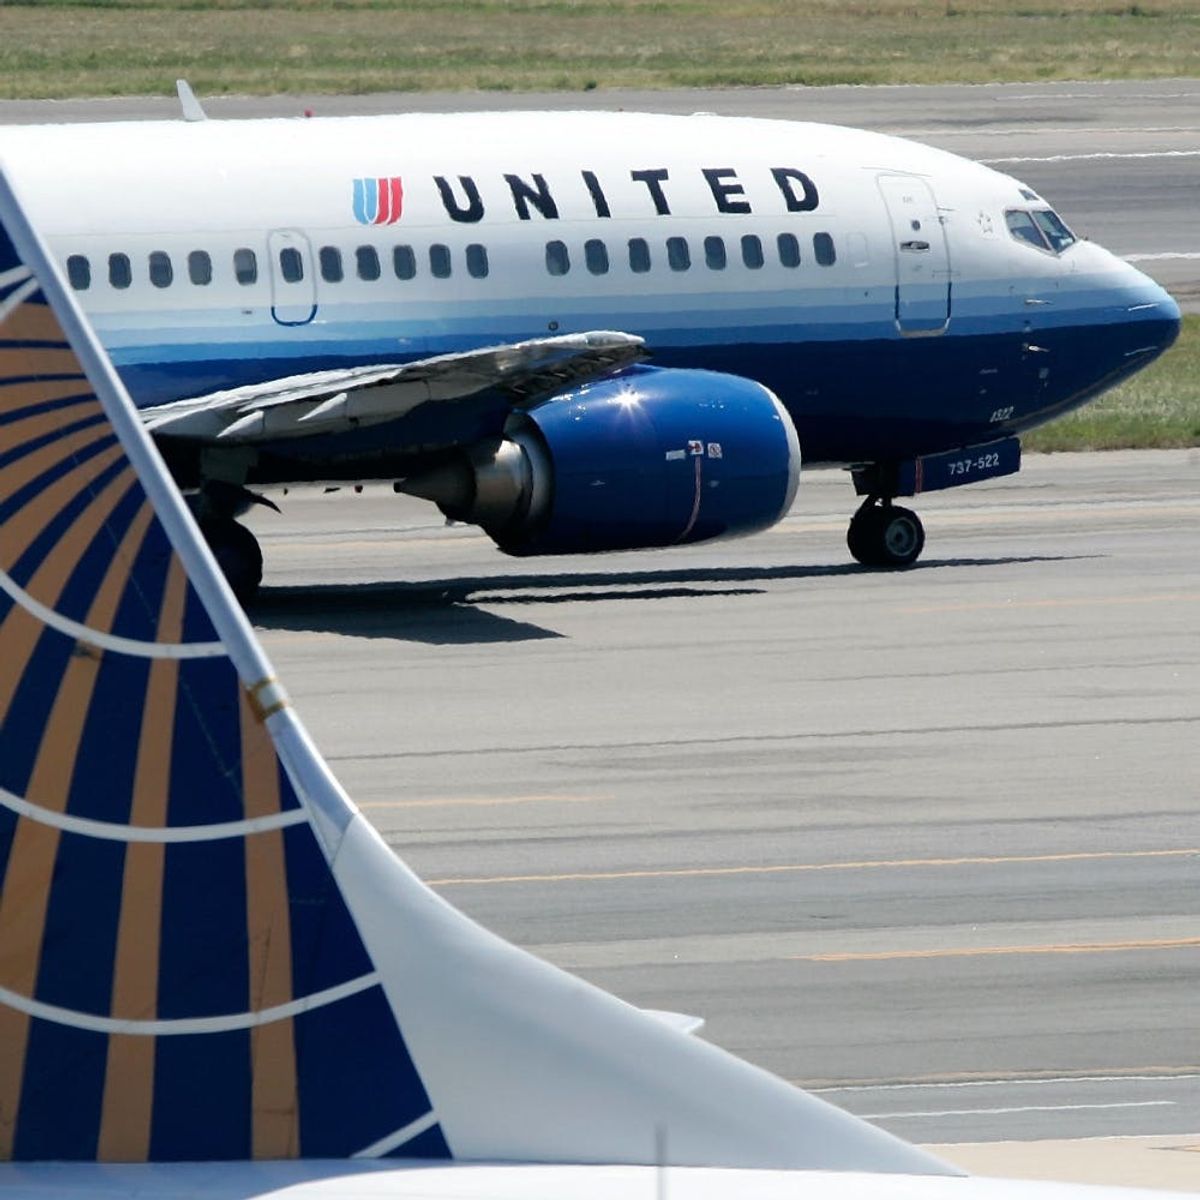 United Just Reached a Shocking Settlement With the Man They Dragged from a Plane